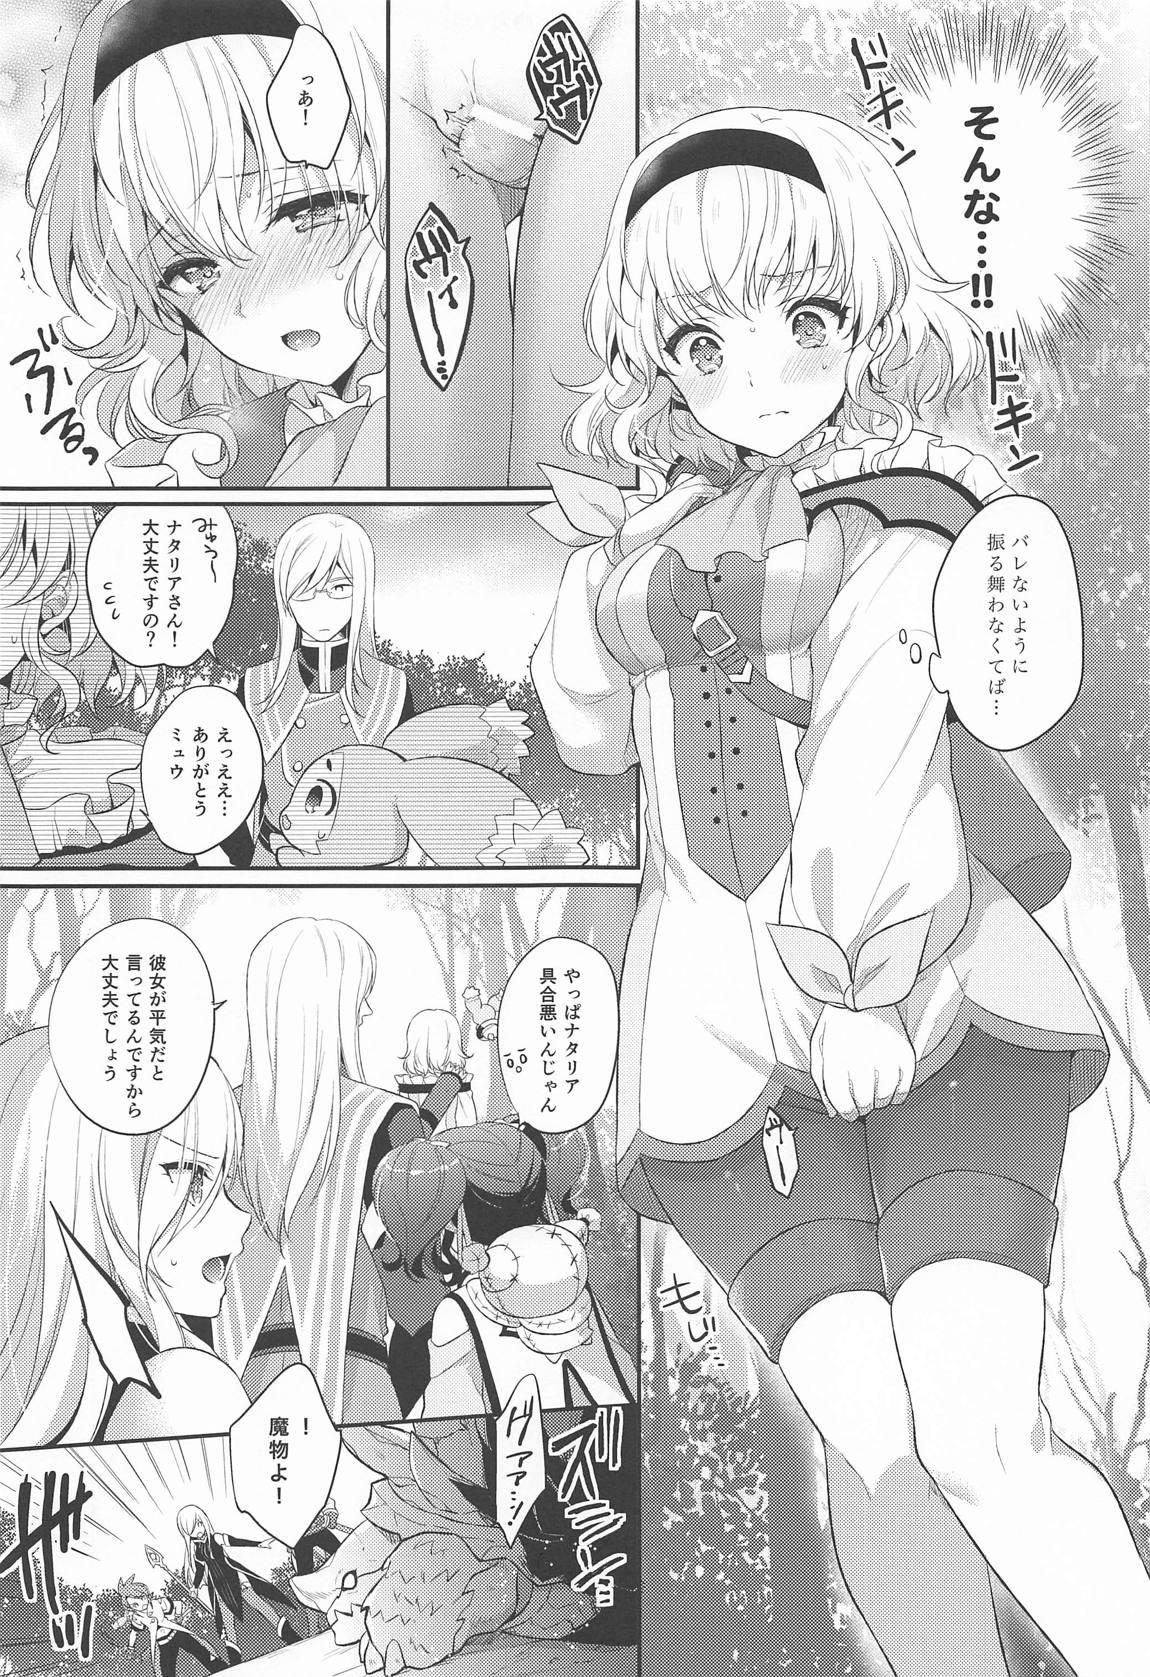 Spy Camera dolcemente - Tales of the abyss Sapphic - Page 10